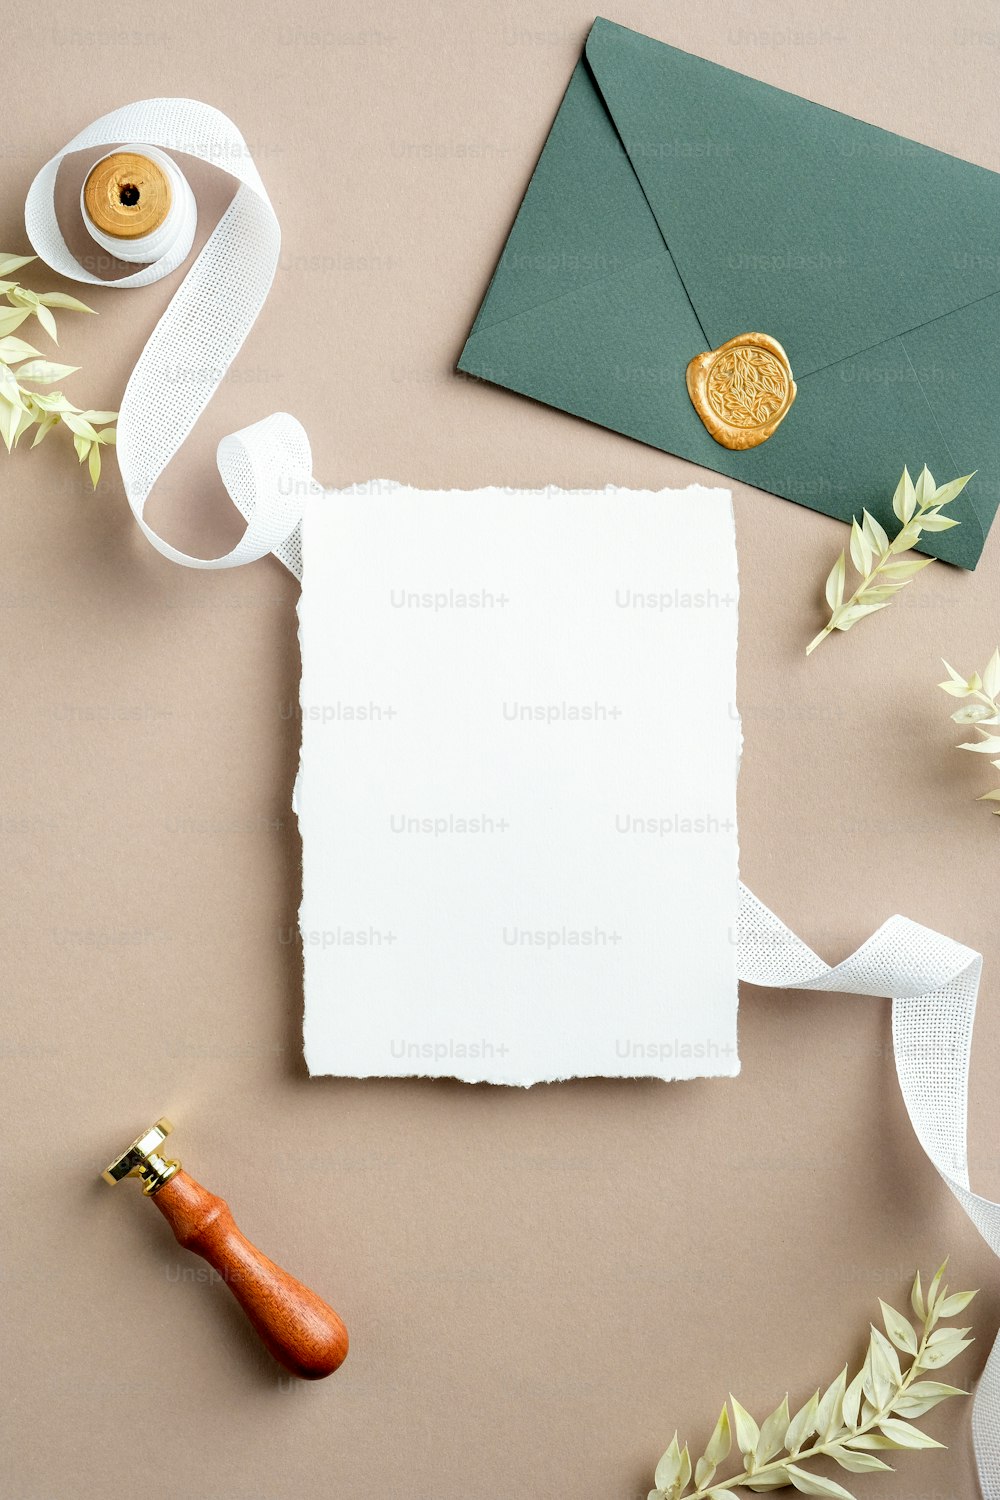 Ripped sheet of paper, silk ribbon, green envelope with wax seal, dried flowers on pastel beige background. Wedding invitation card template. Flat lay, top view, copy space.